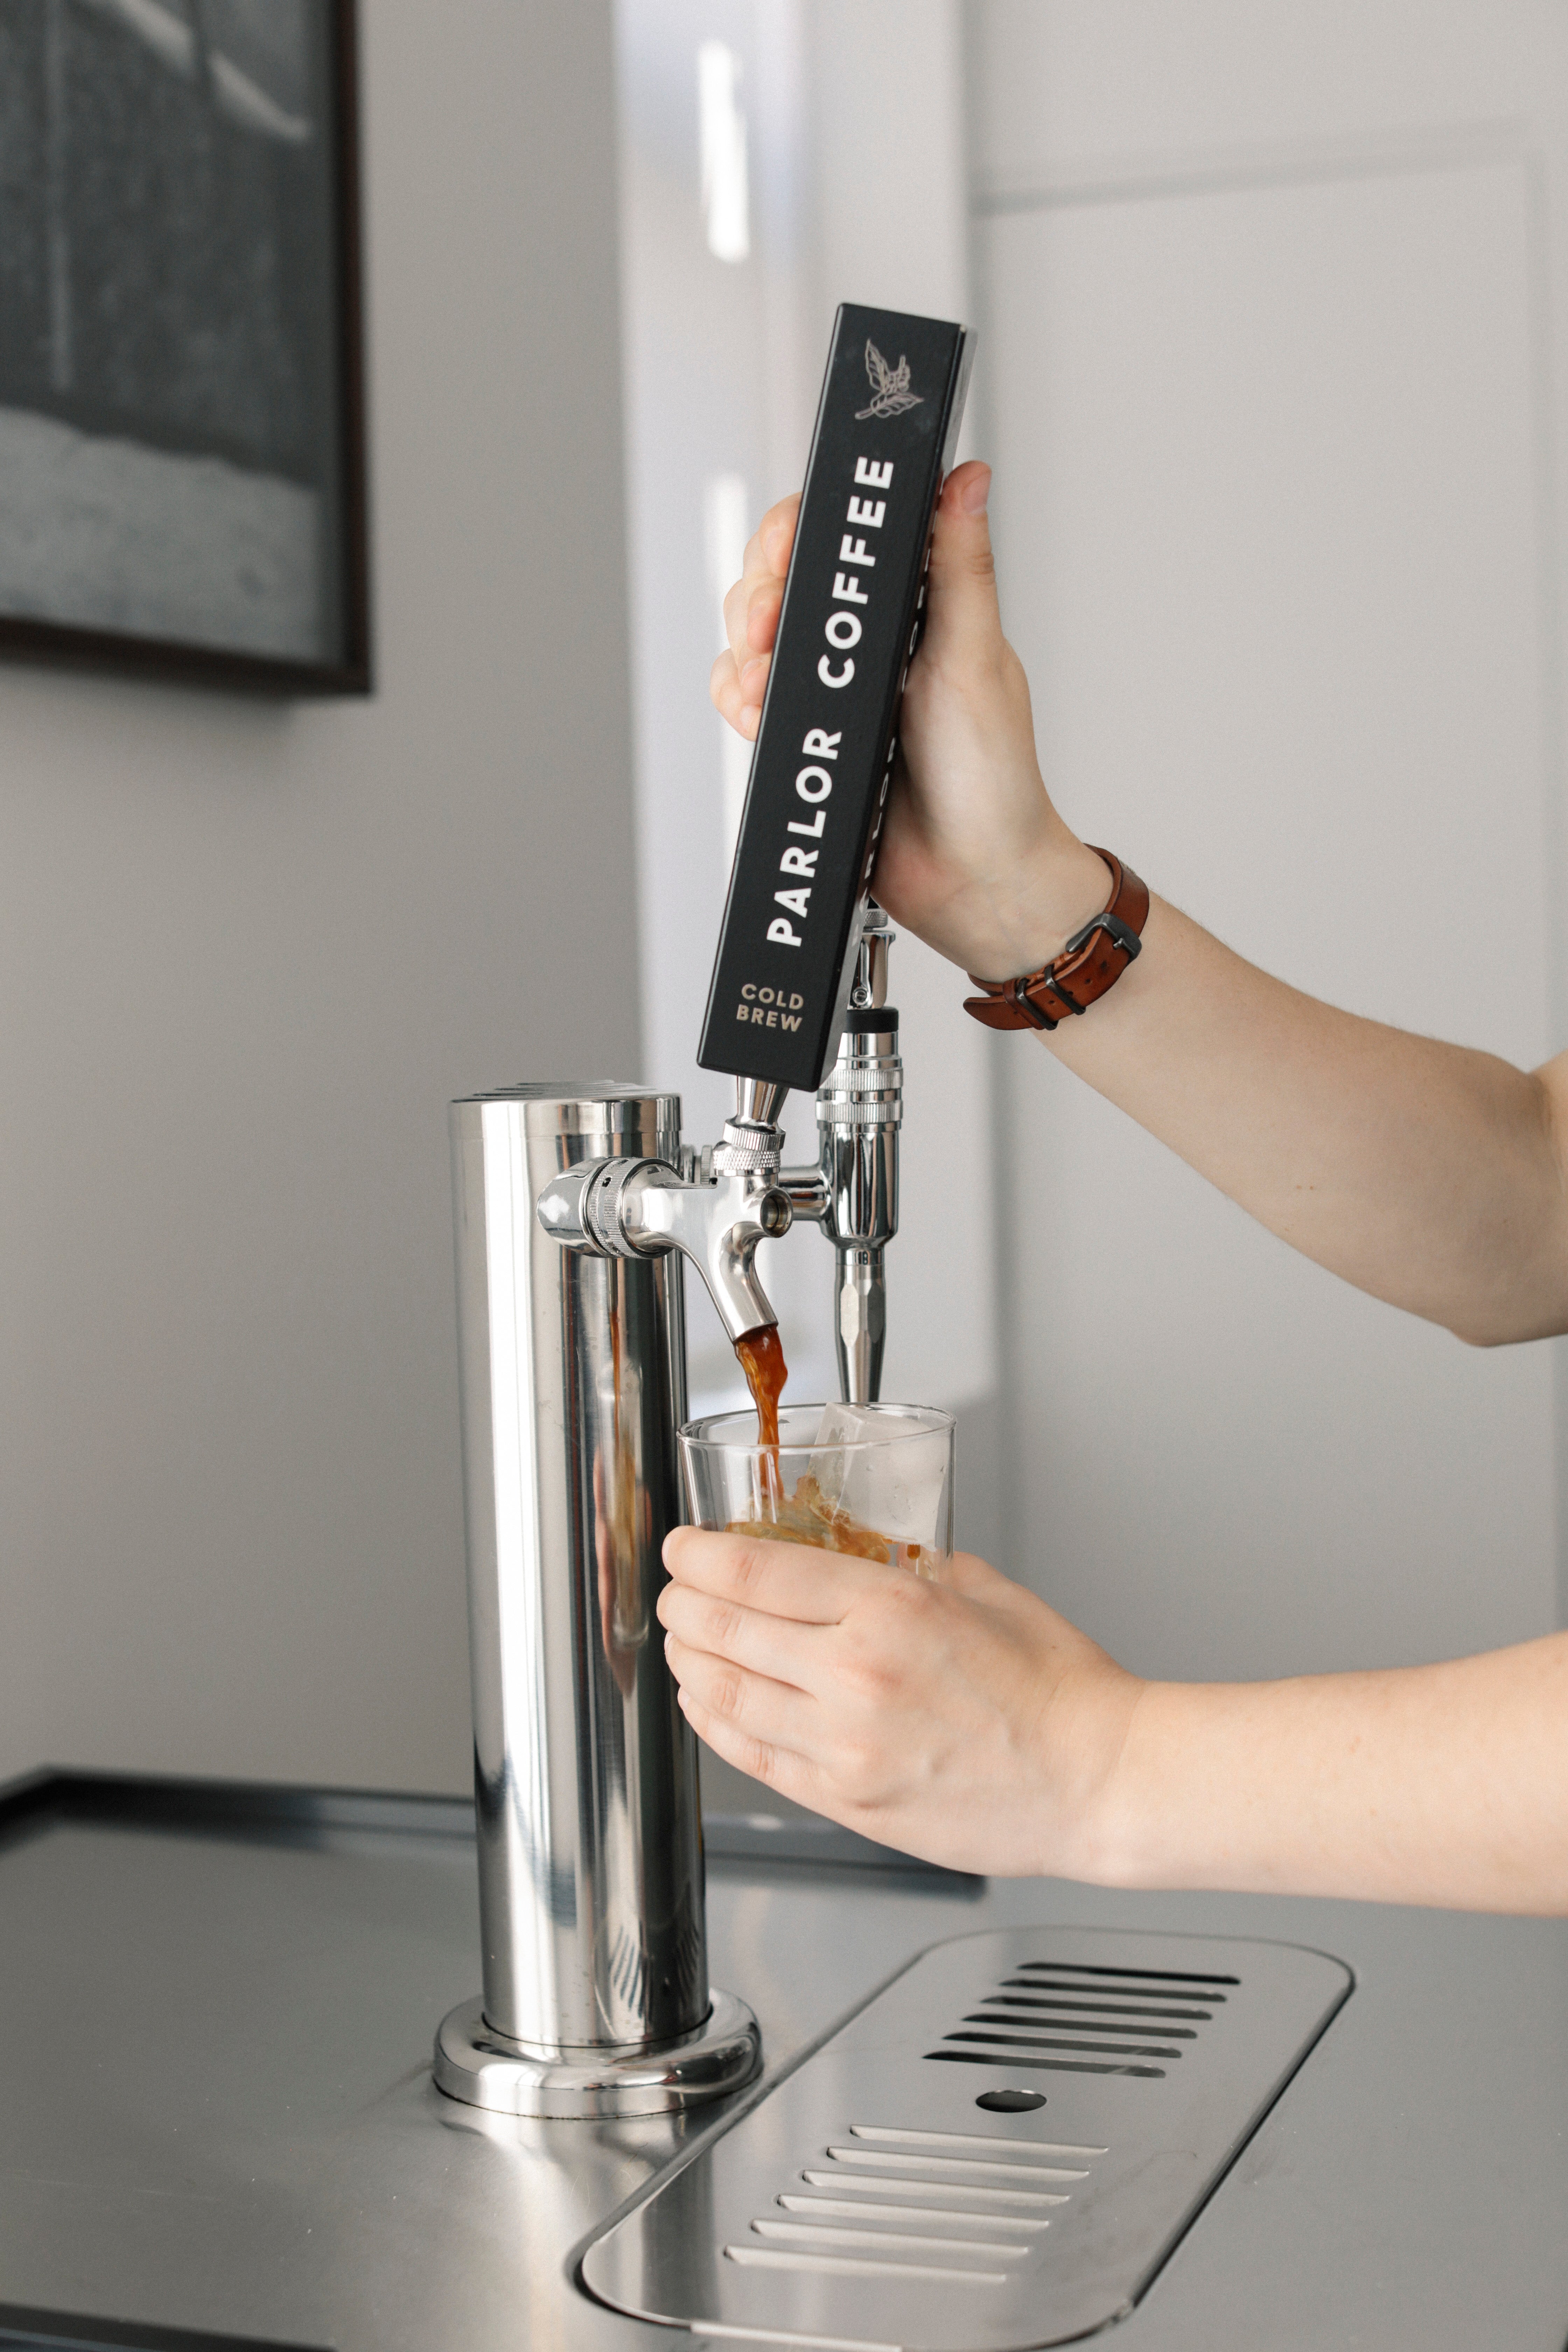 Pouring Parlor Cold Brew